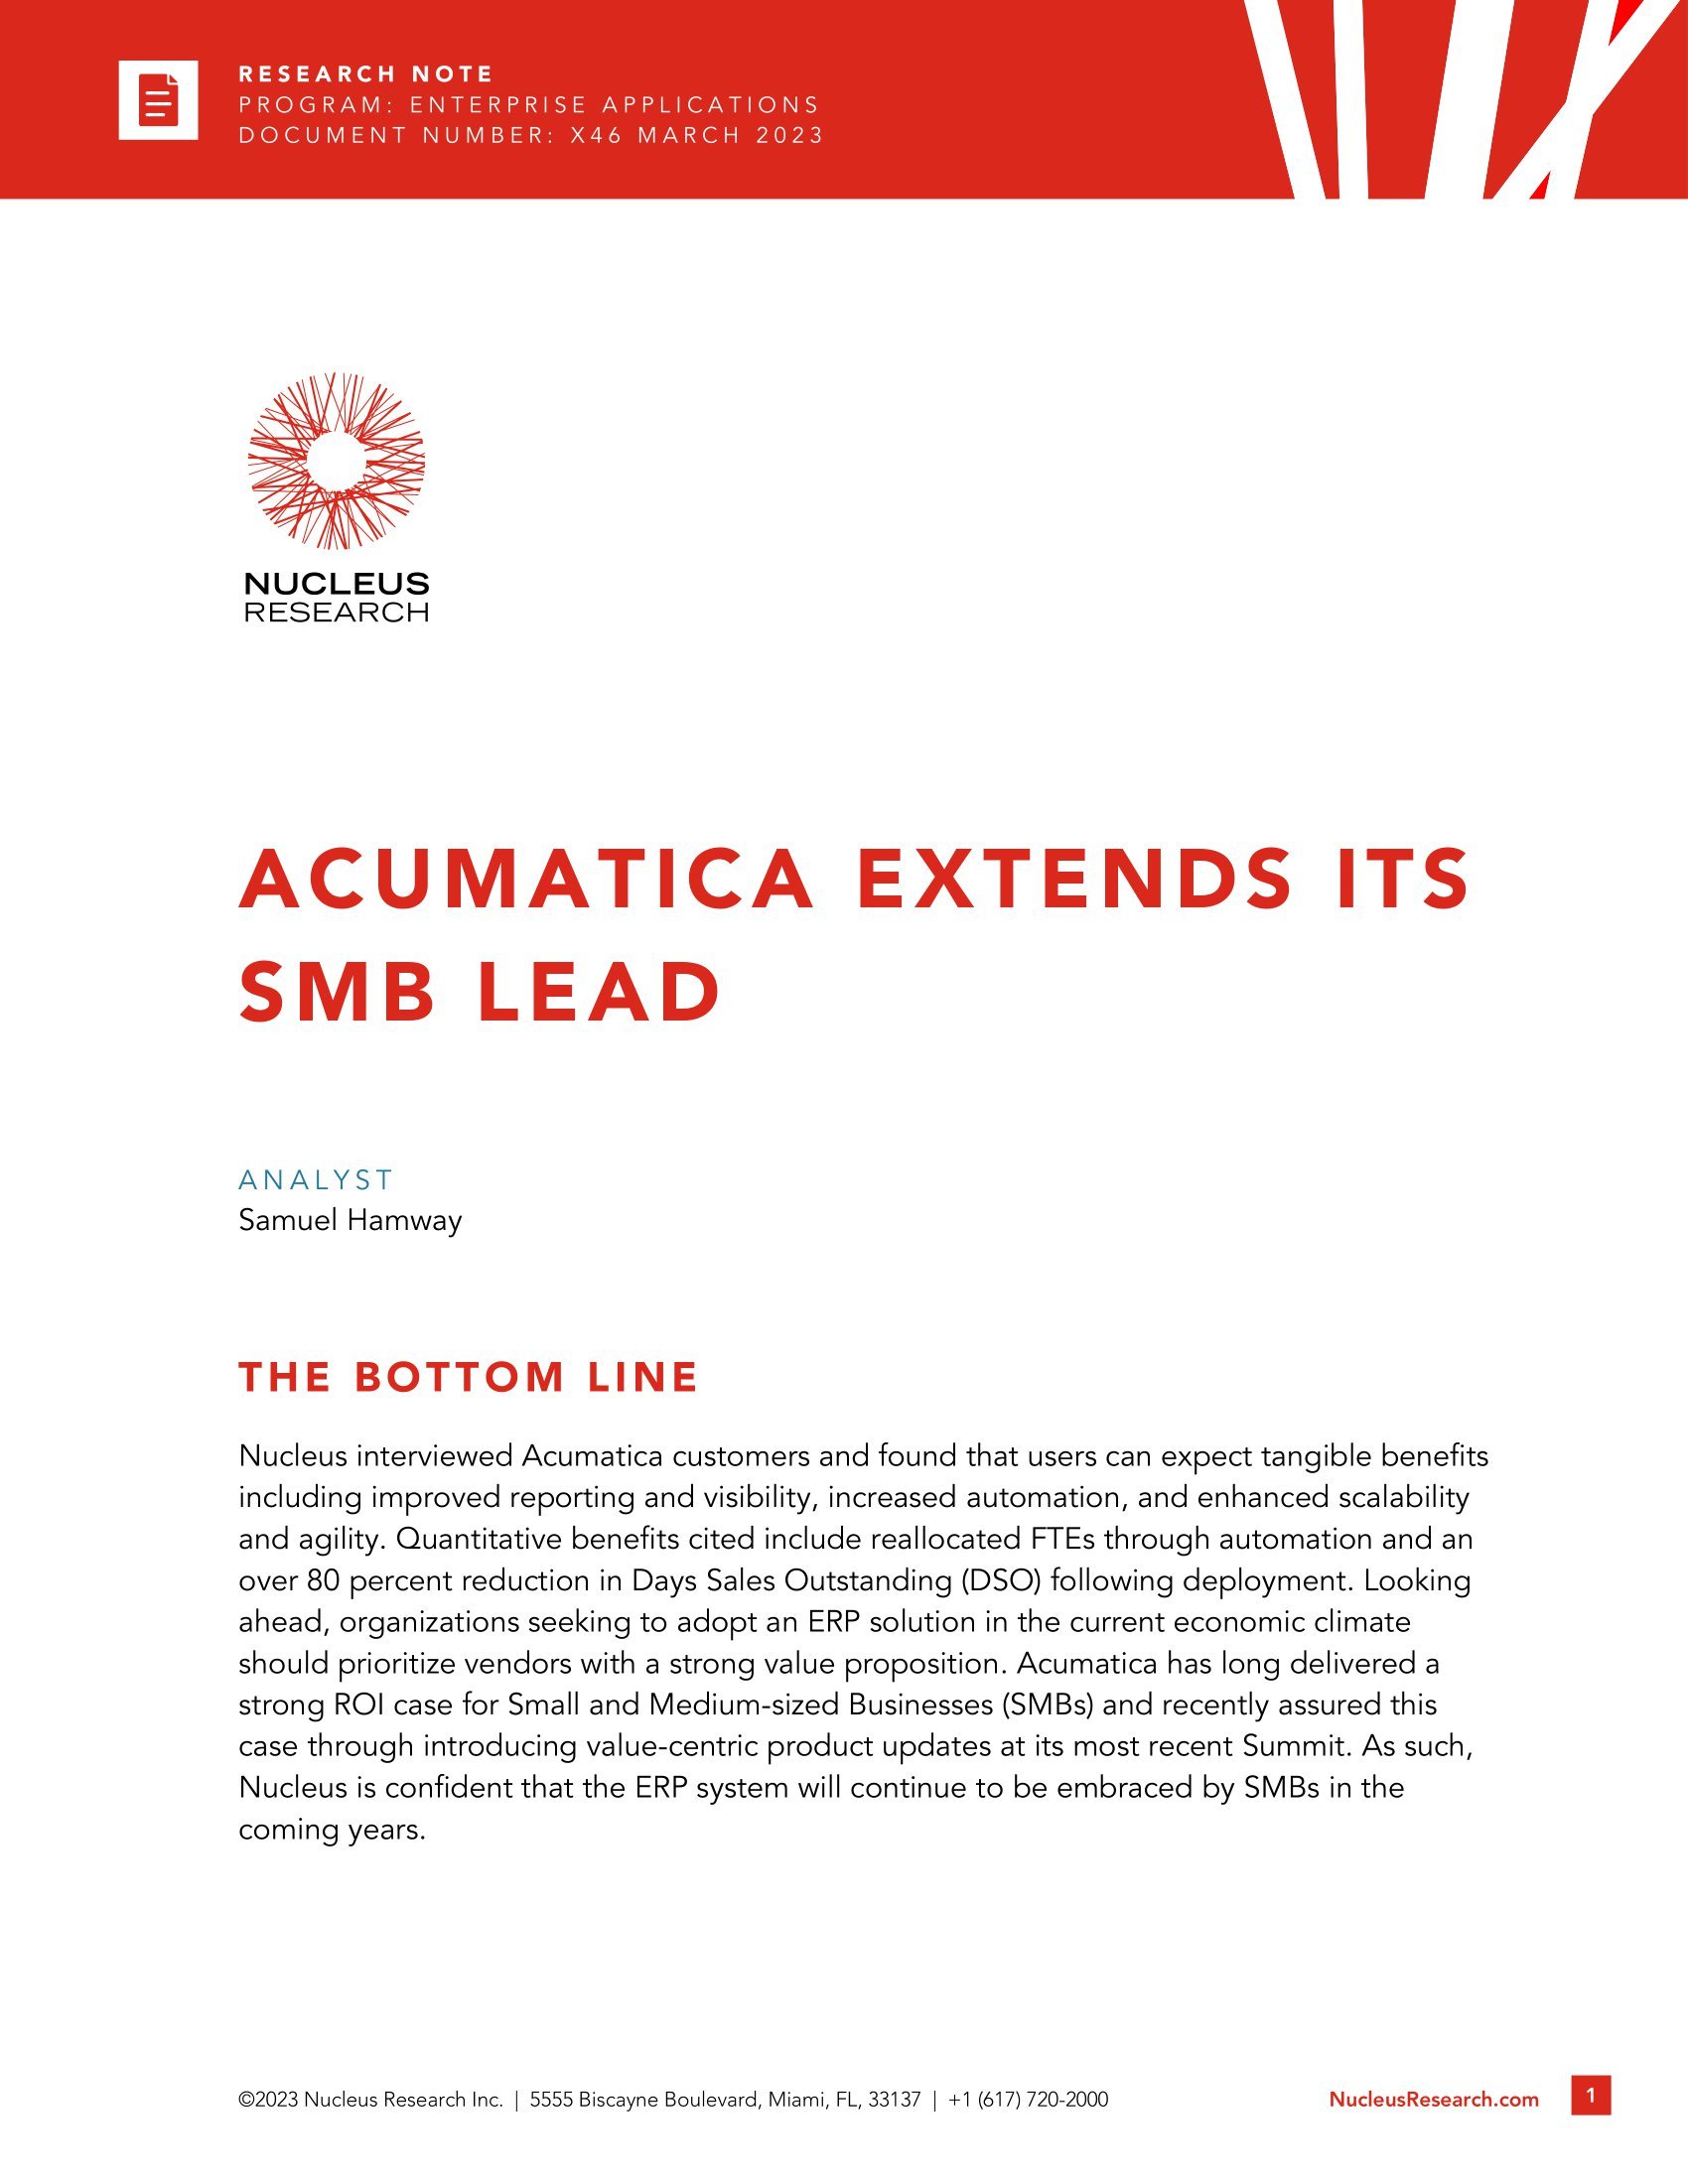 Acumatica and SMBs: A Match Made in ERP Heaven